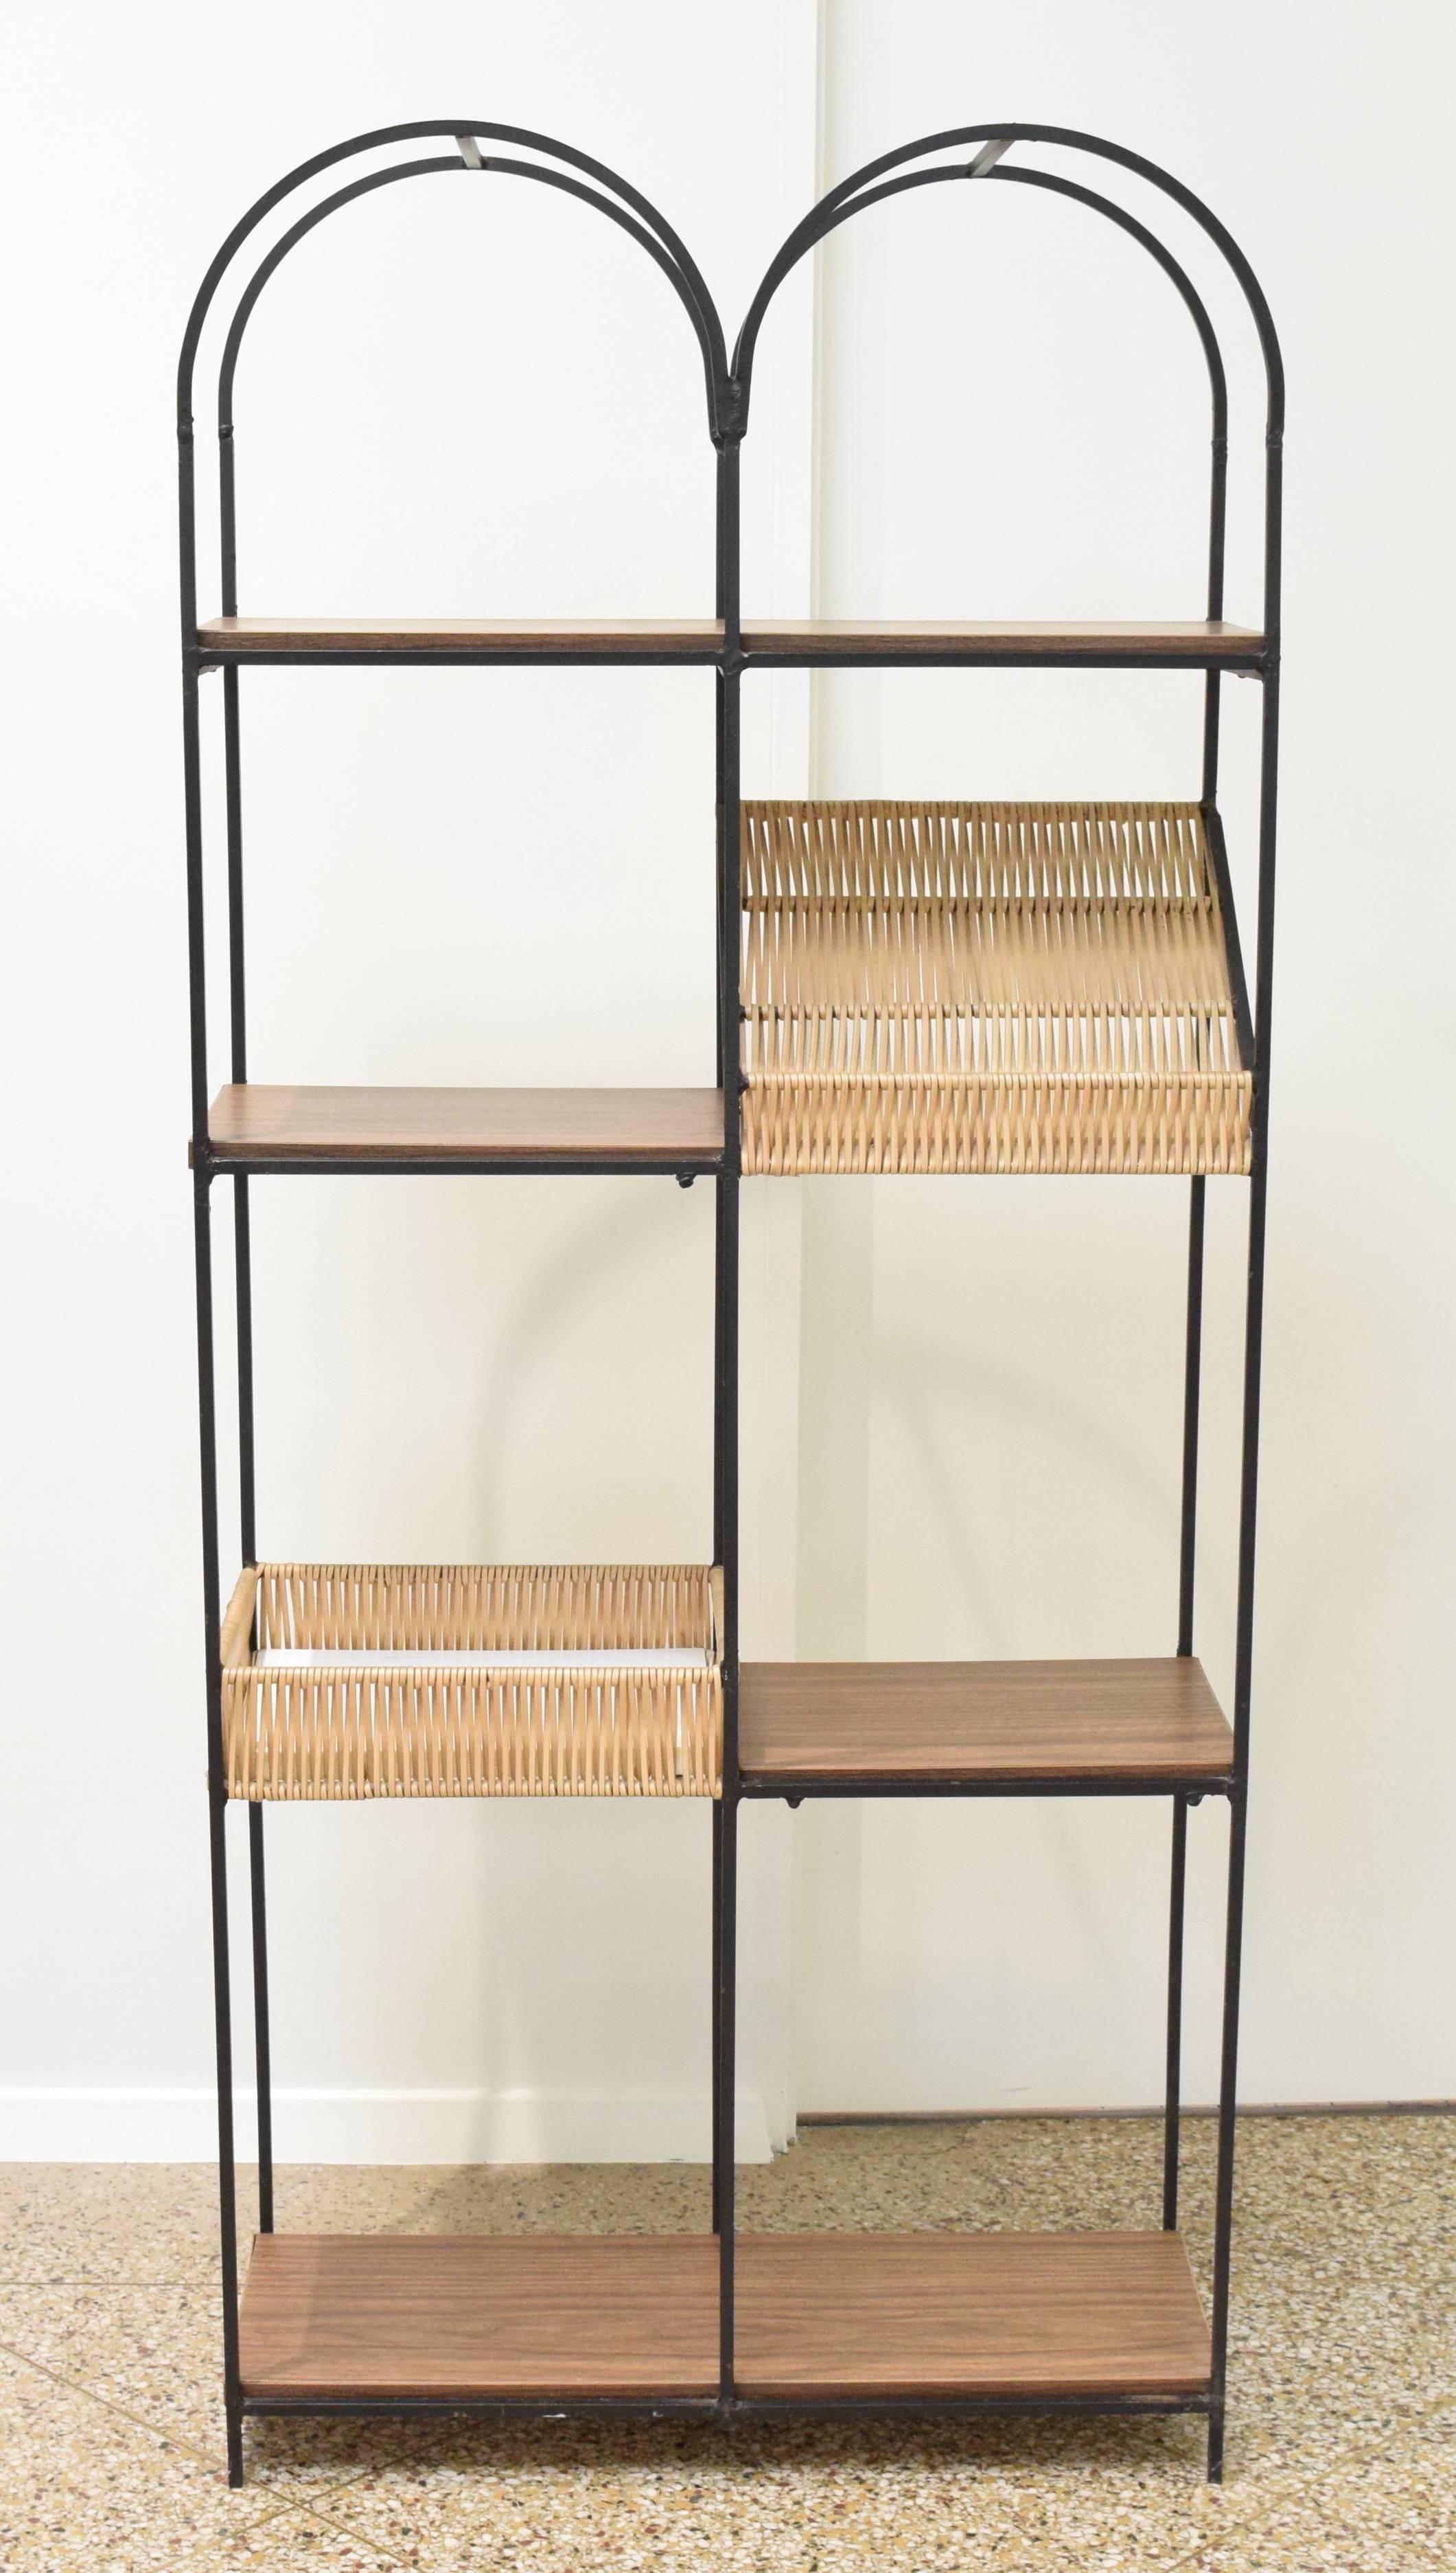 Store closing-- last day is 7/31. Offers welcome! Etagere with double arches designed by Arthur Umanoff for Shaver Howard and retailed by Raymor c. 1967. This rarely-seen version was special ordered without the pierced Mayan sun decorative panel,